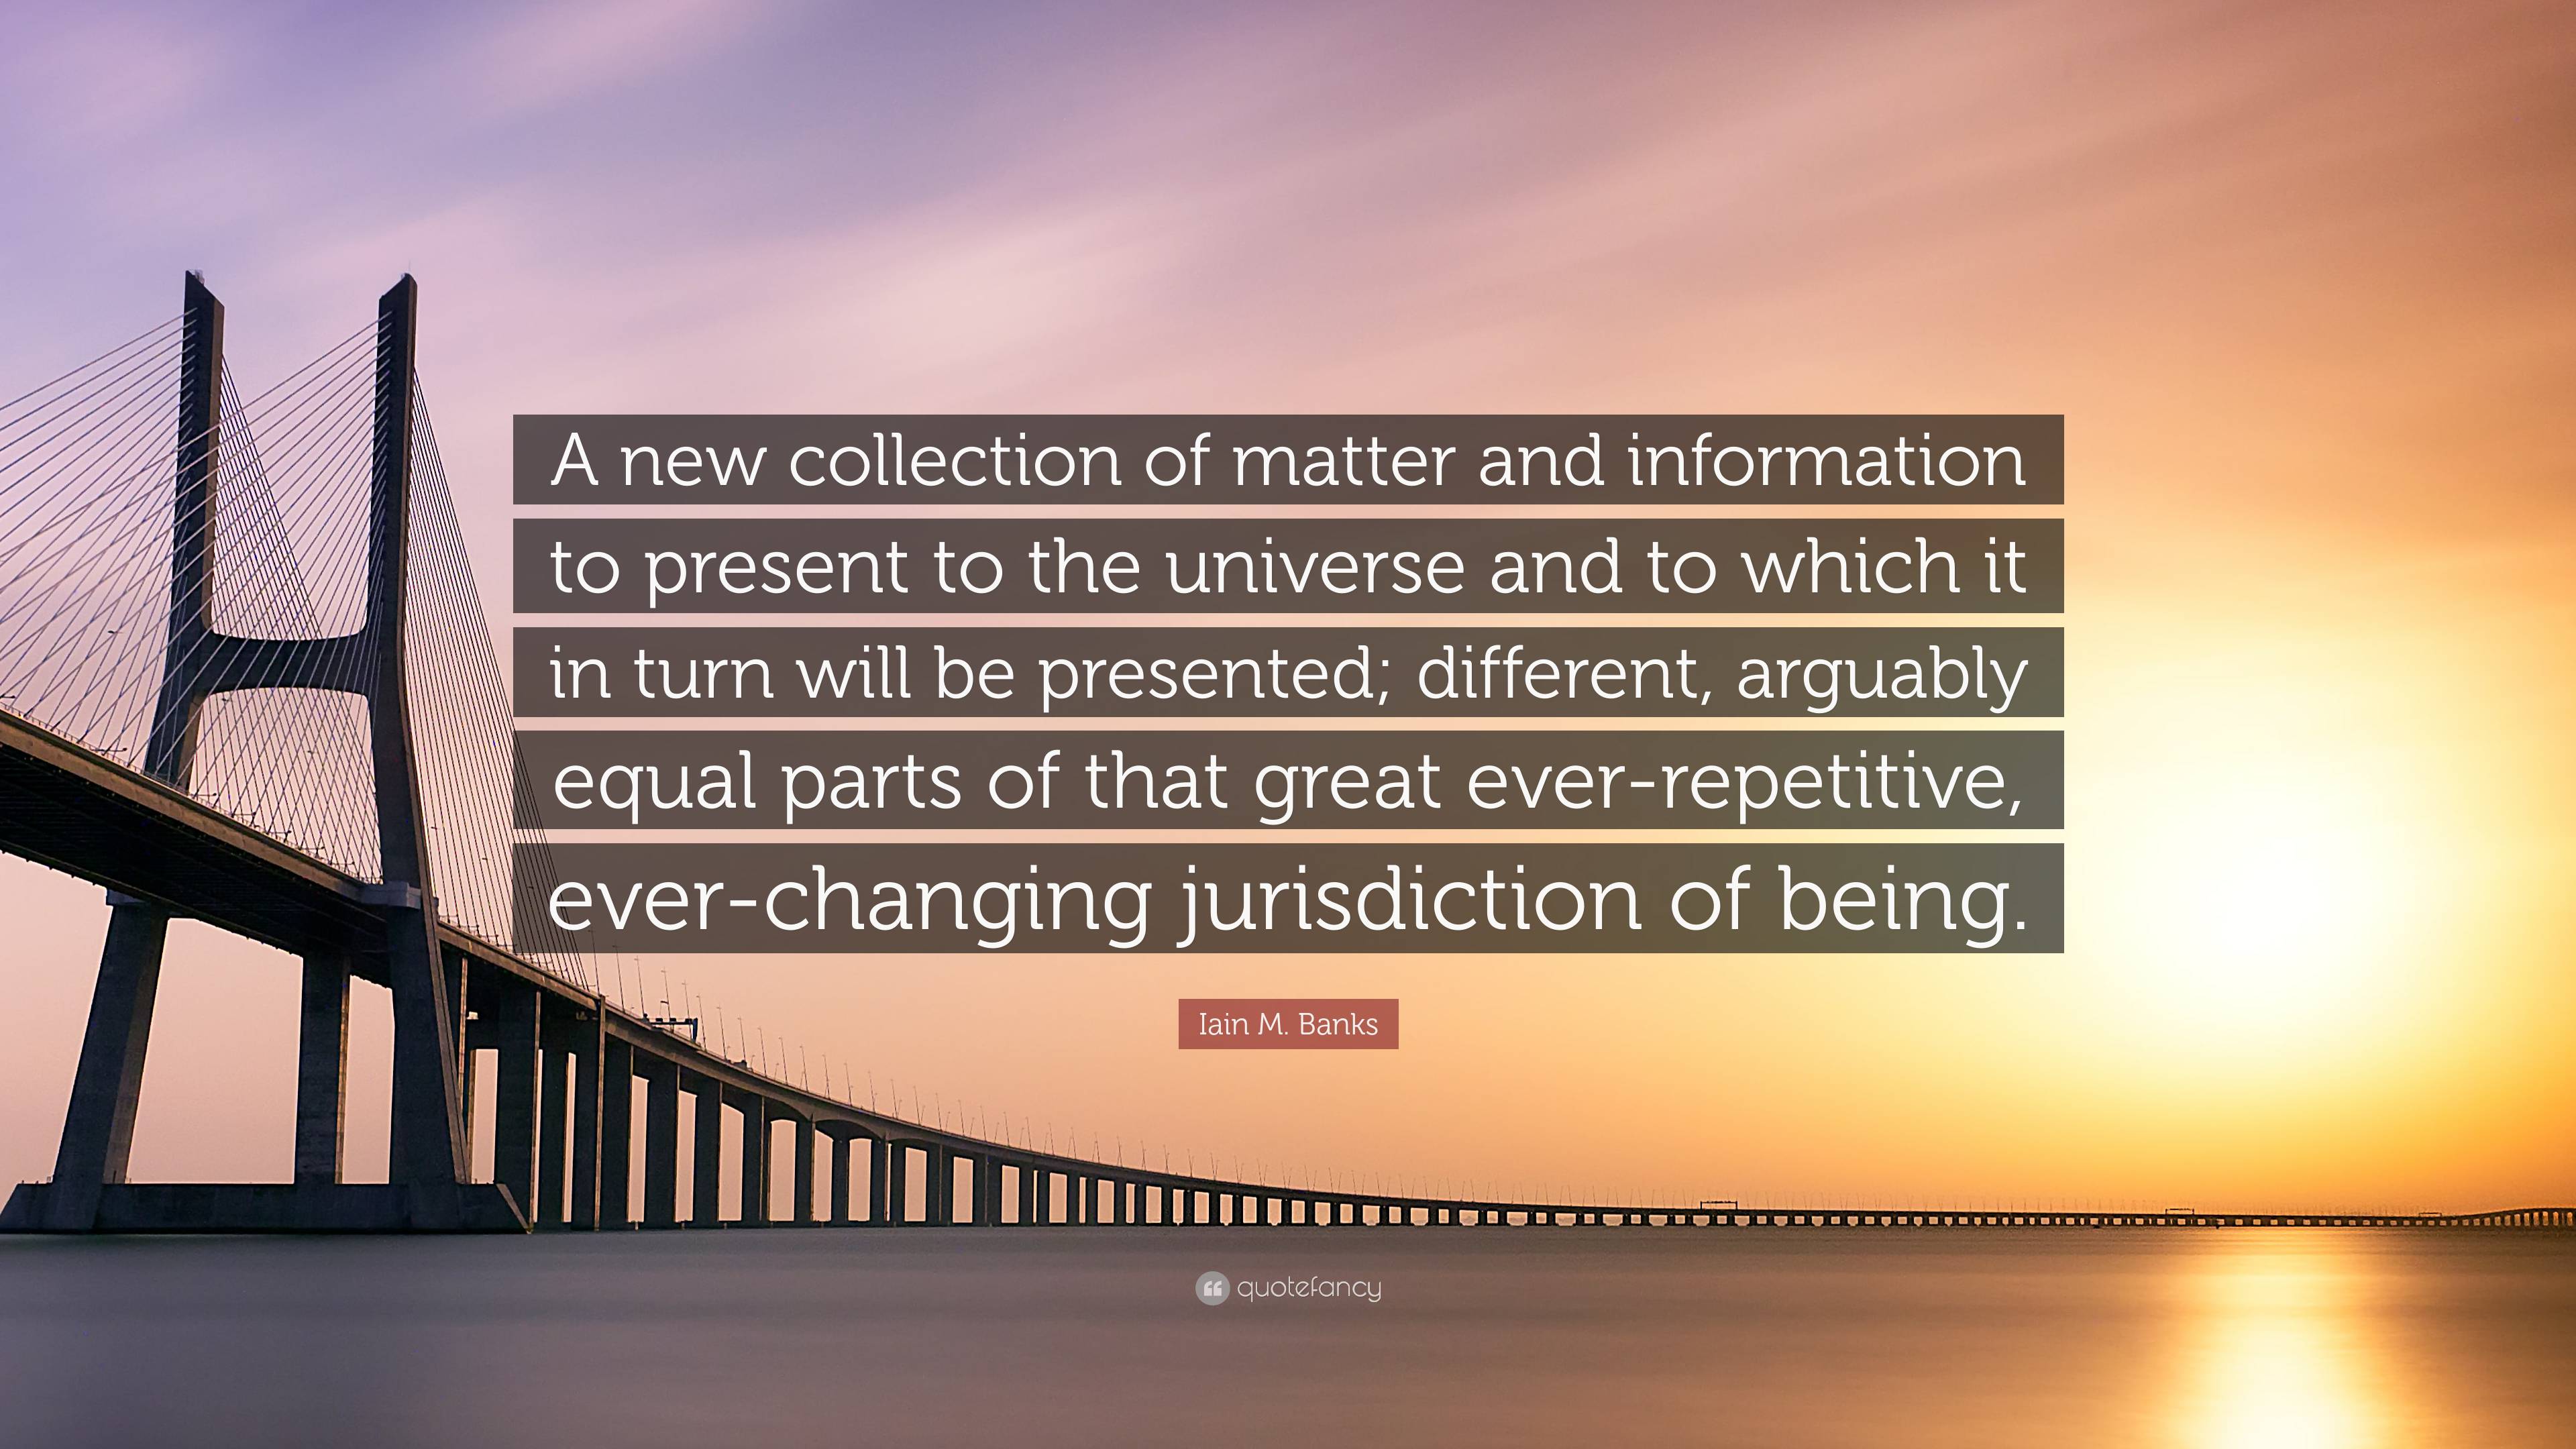 https://quotefancy.com/media/wallpaper/3840x2160/7536496-Iain-M-Banks-Quote-A-new-collection-of-matter-and-information-to.jpg